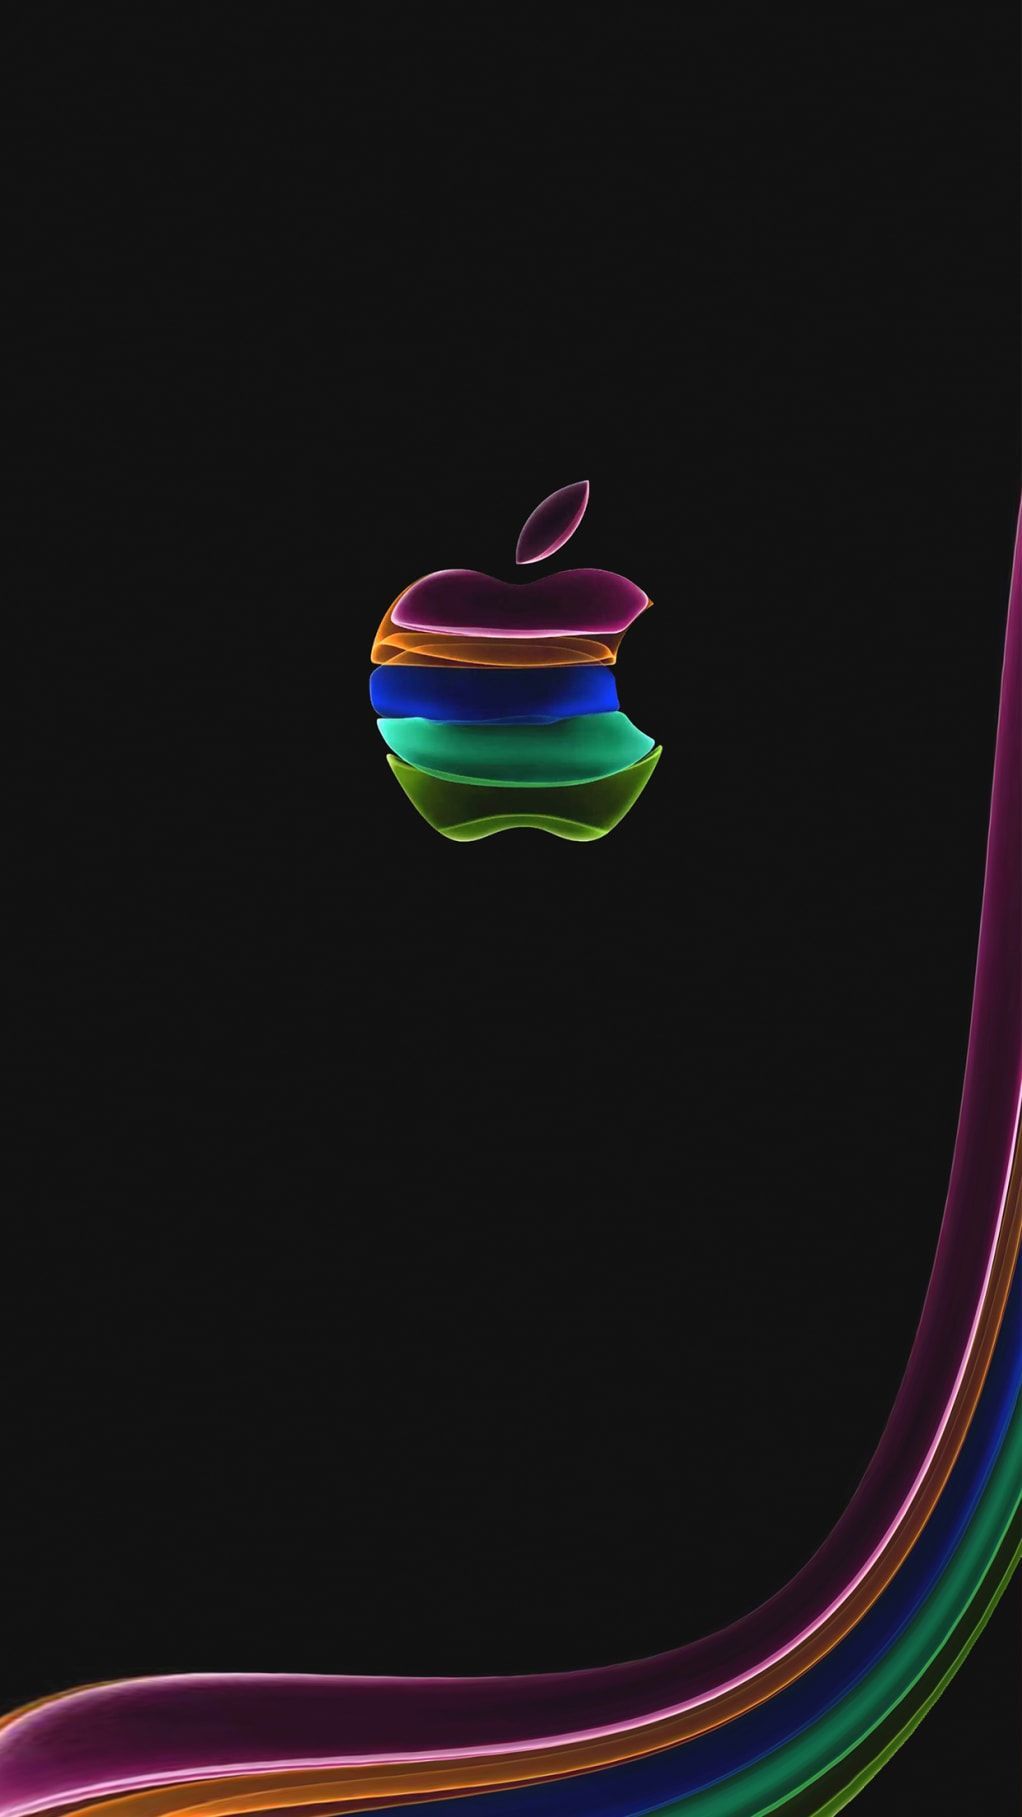 Download wallpaper 840x1336 apple event spring loaded dark logo iphone  5 iphone 5s iphone 5c ipod touch 840x1336 hd background 27148